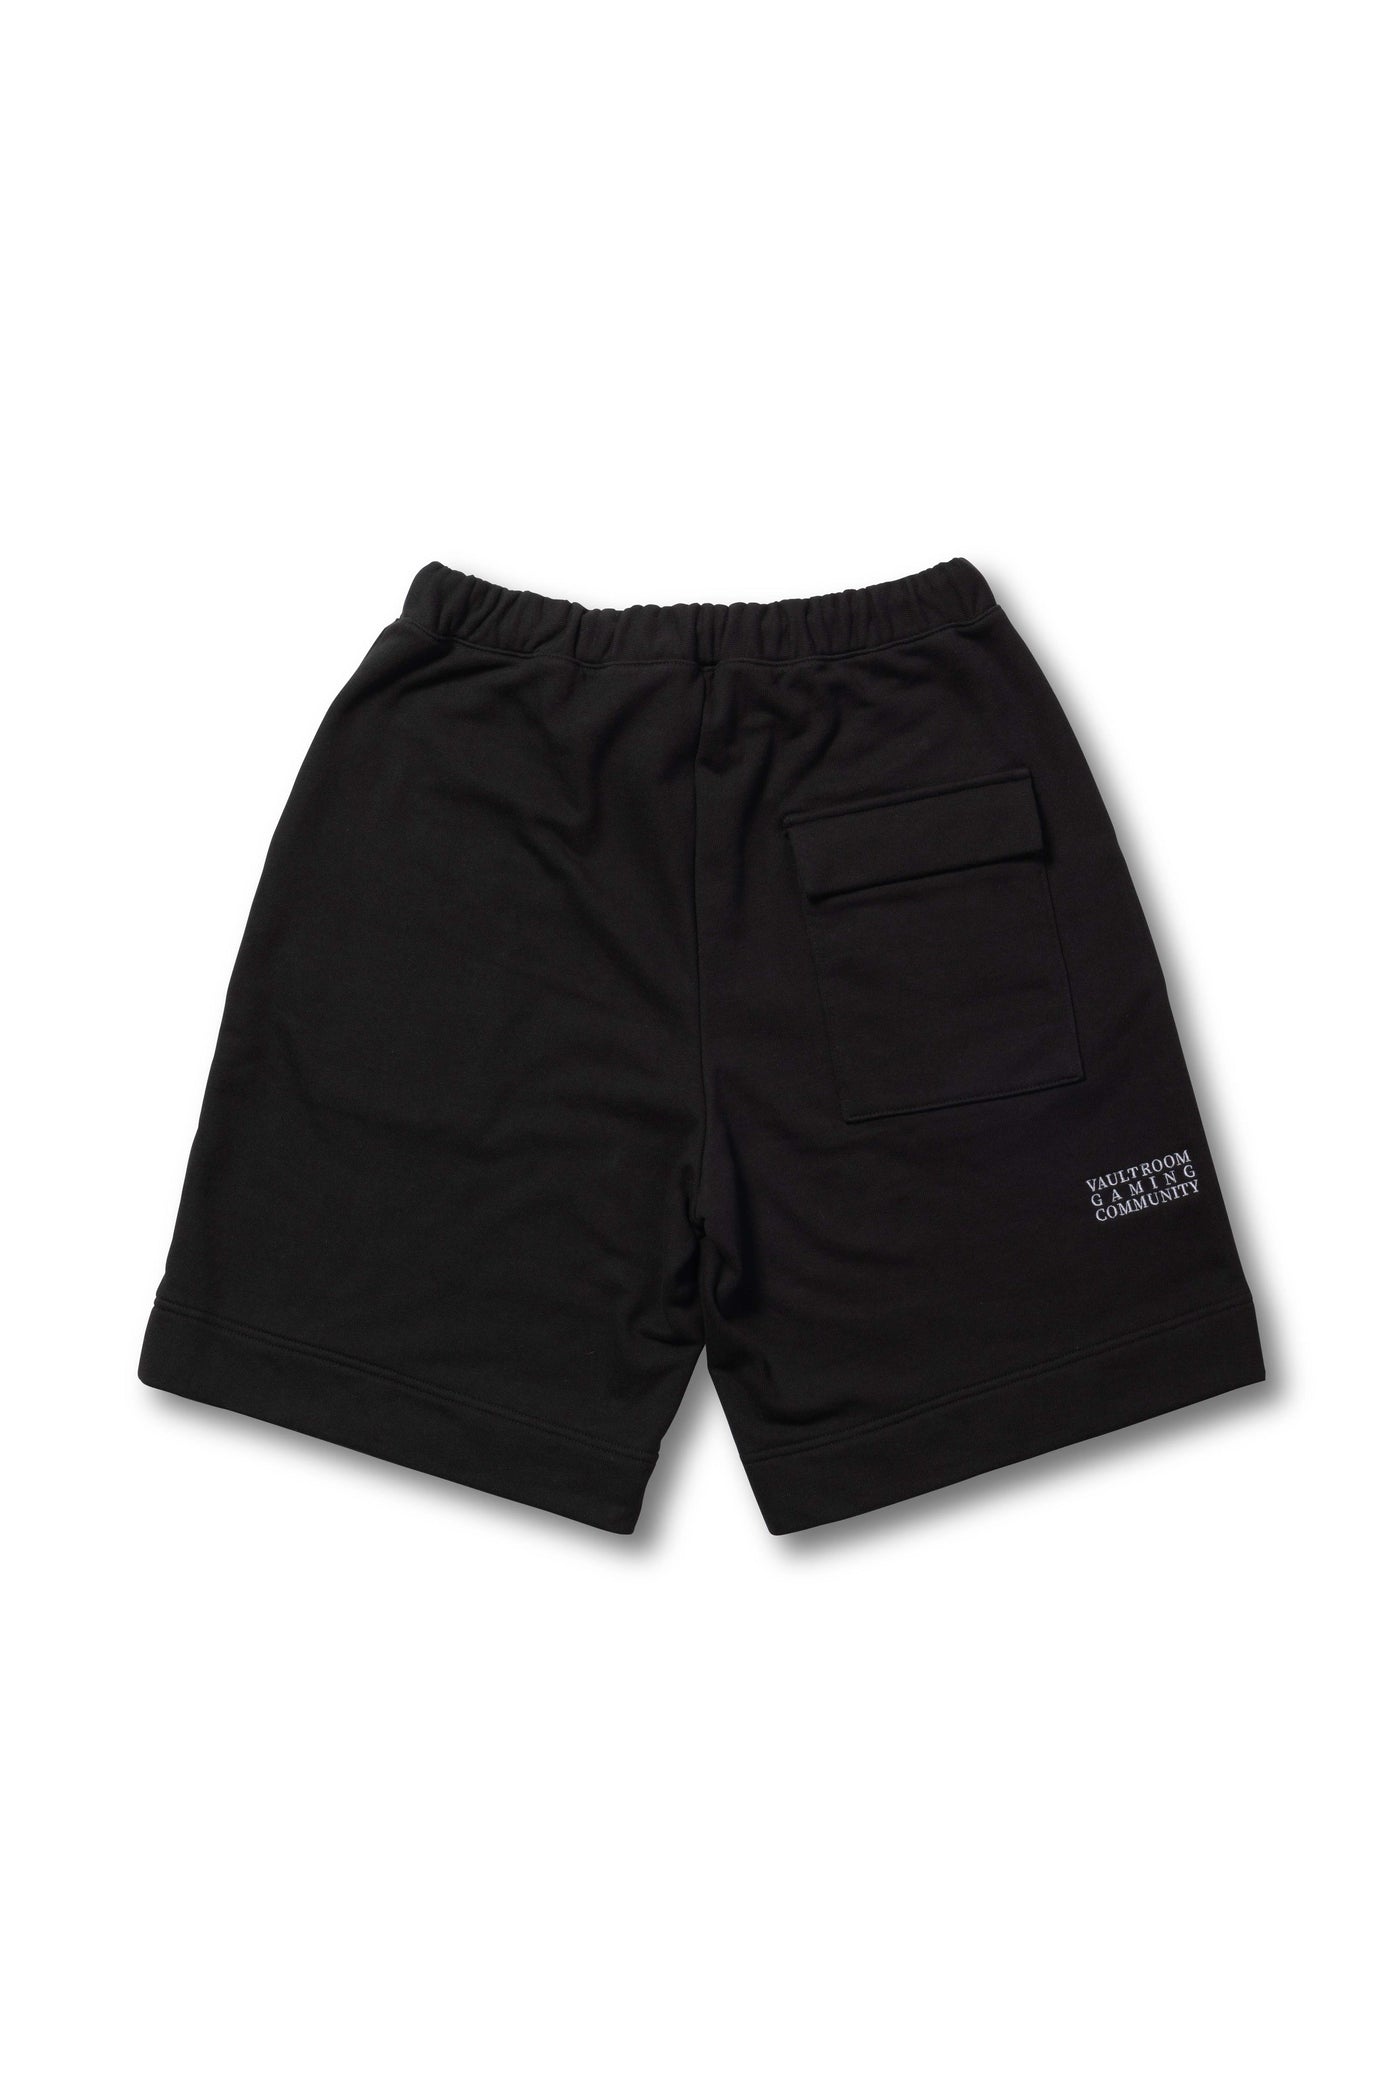 VGC FRENCH TERRY SHORTS BLACK vaultroom-